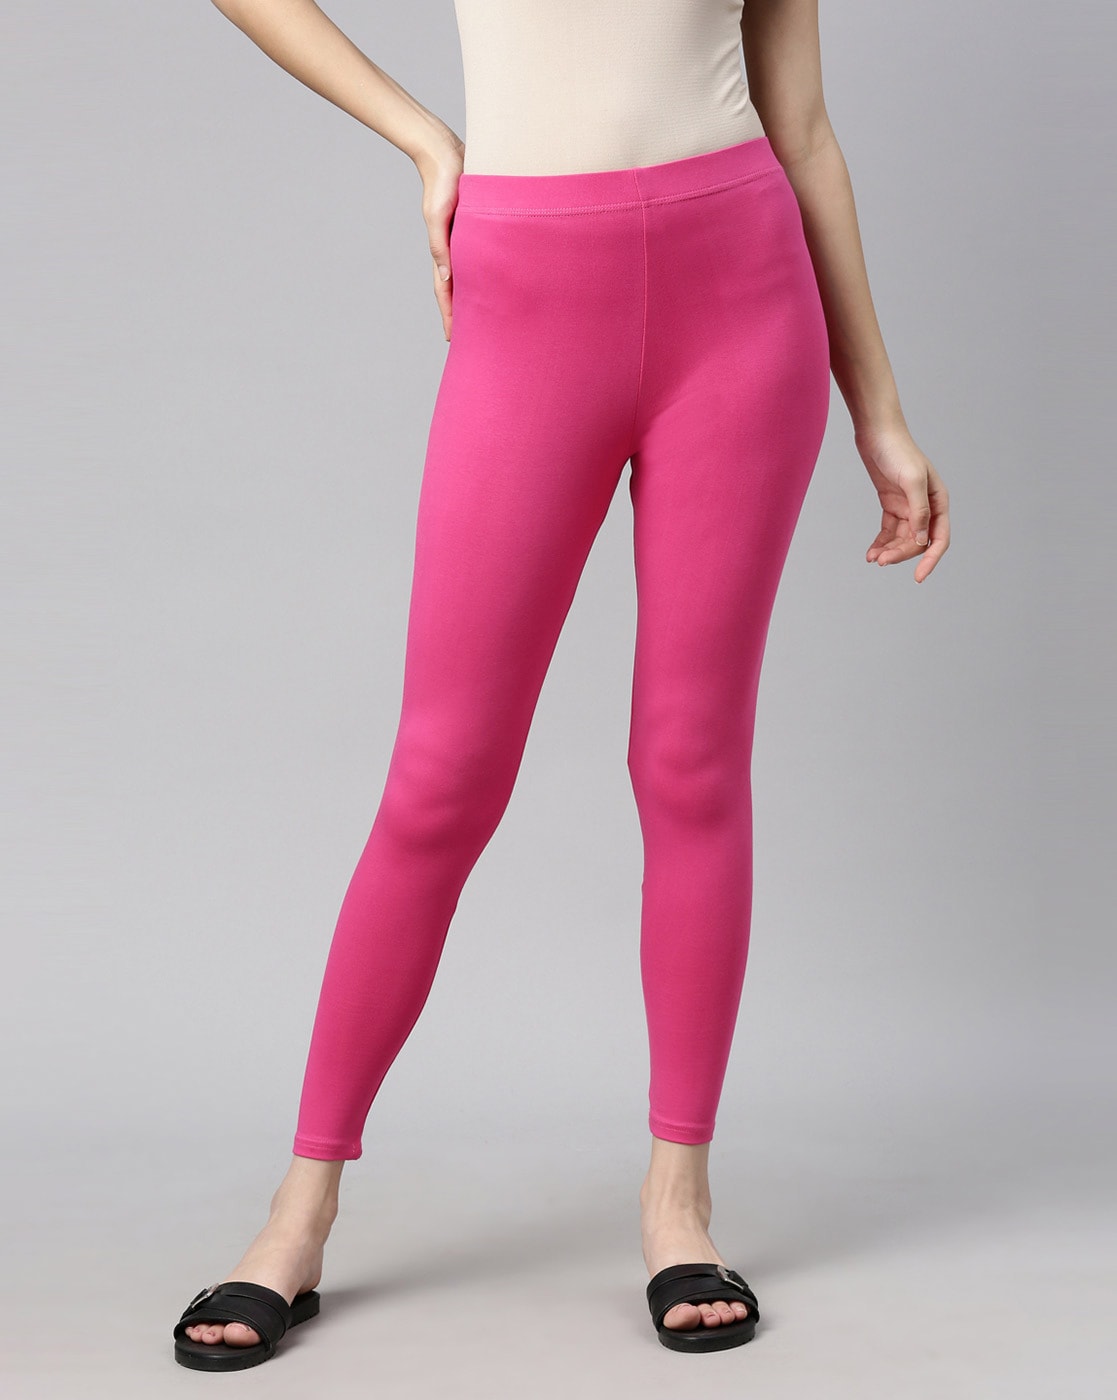 Buy Pink Leggings for Women by Outryt Sport Online | Ajio.com